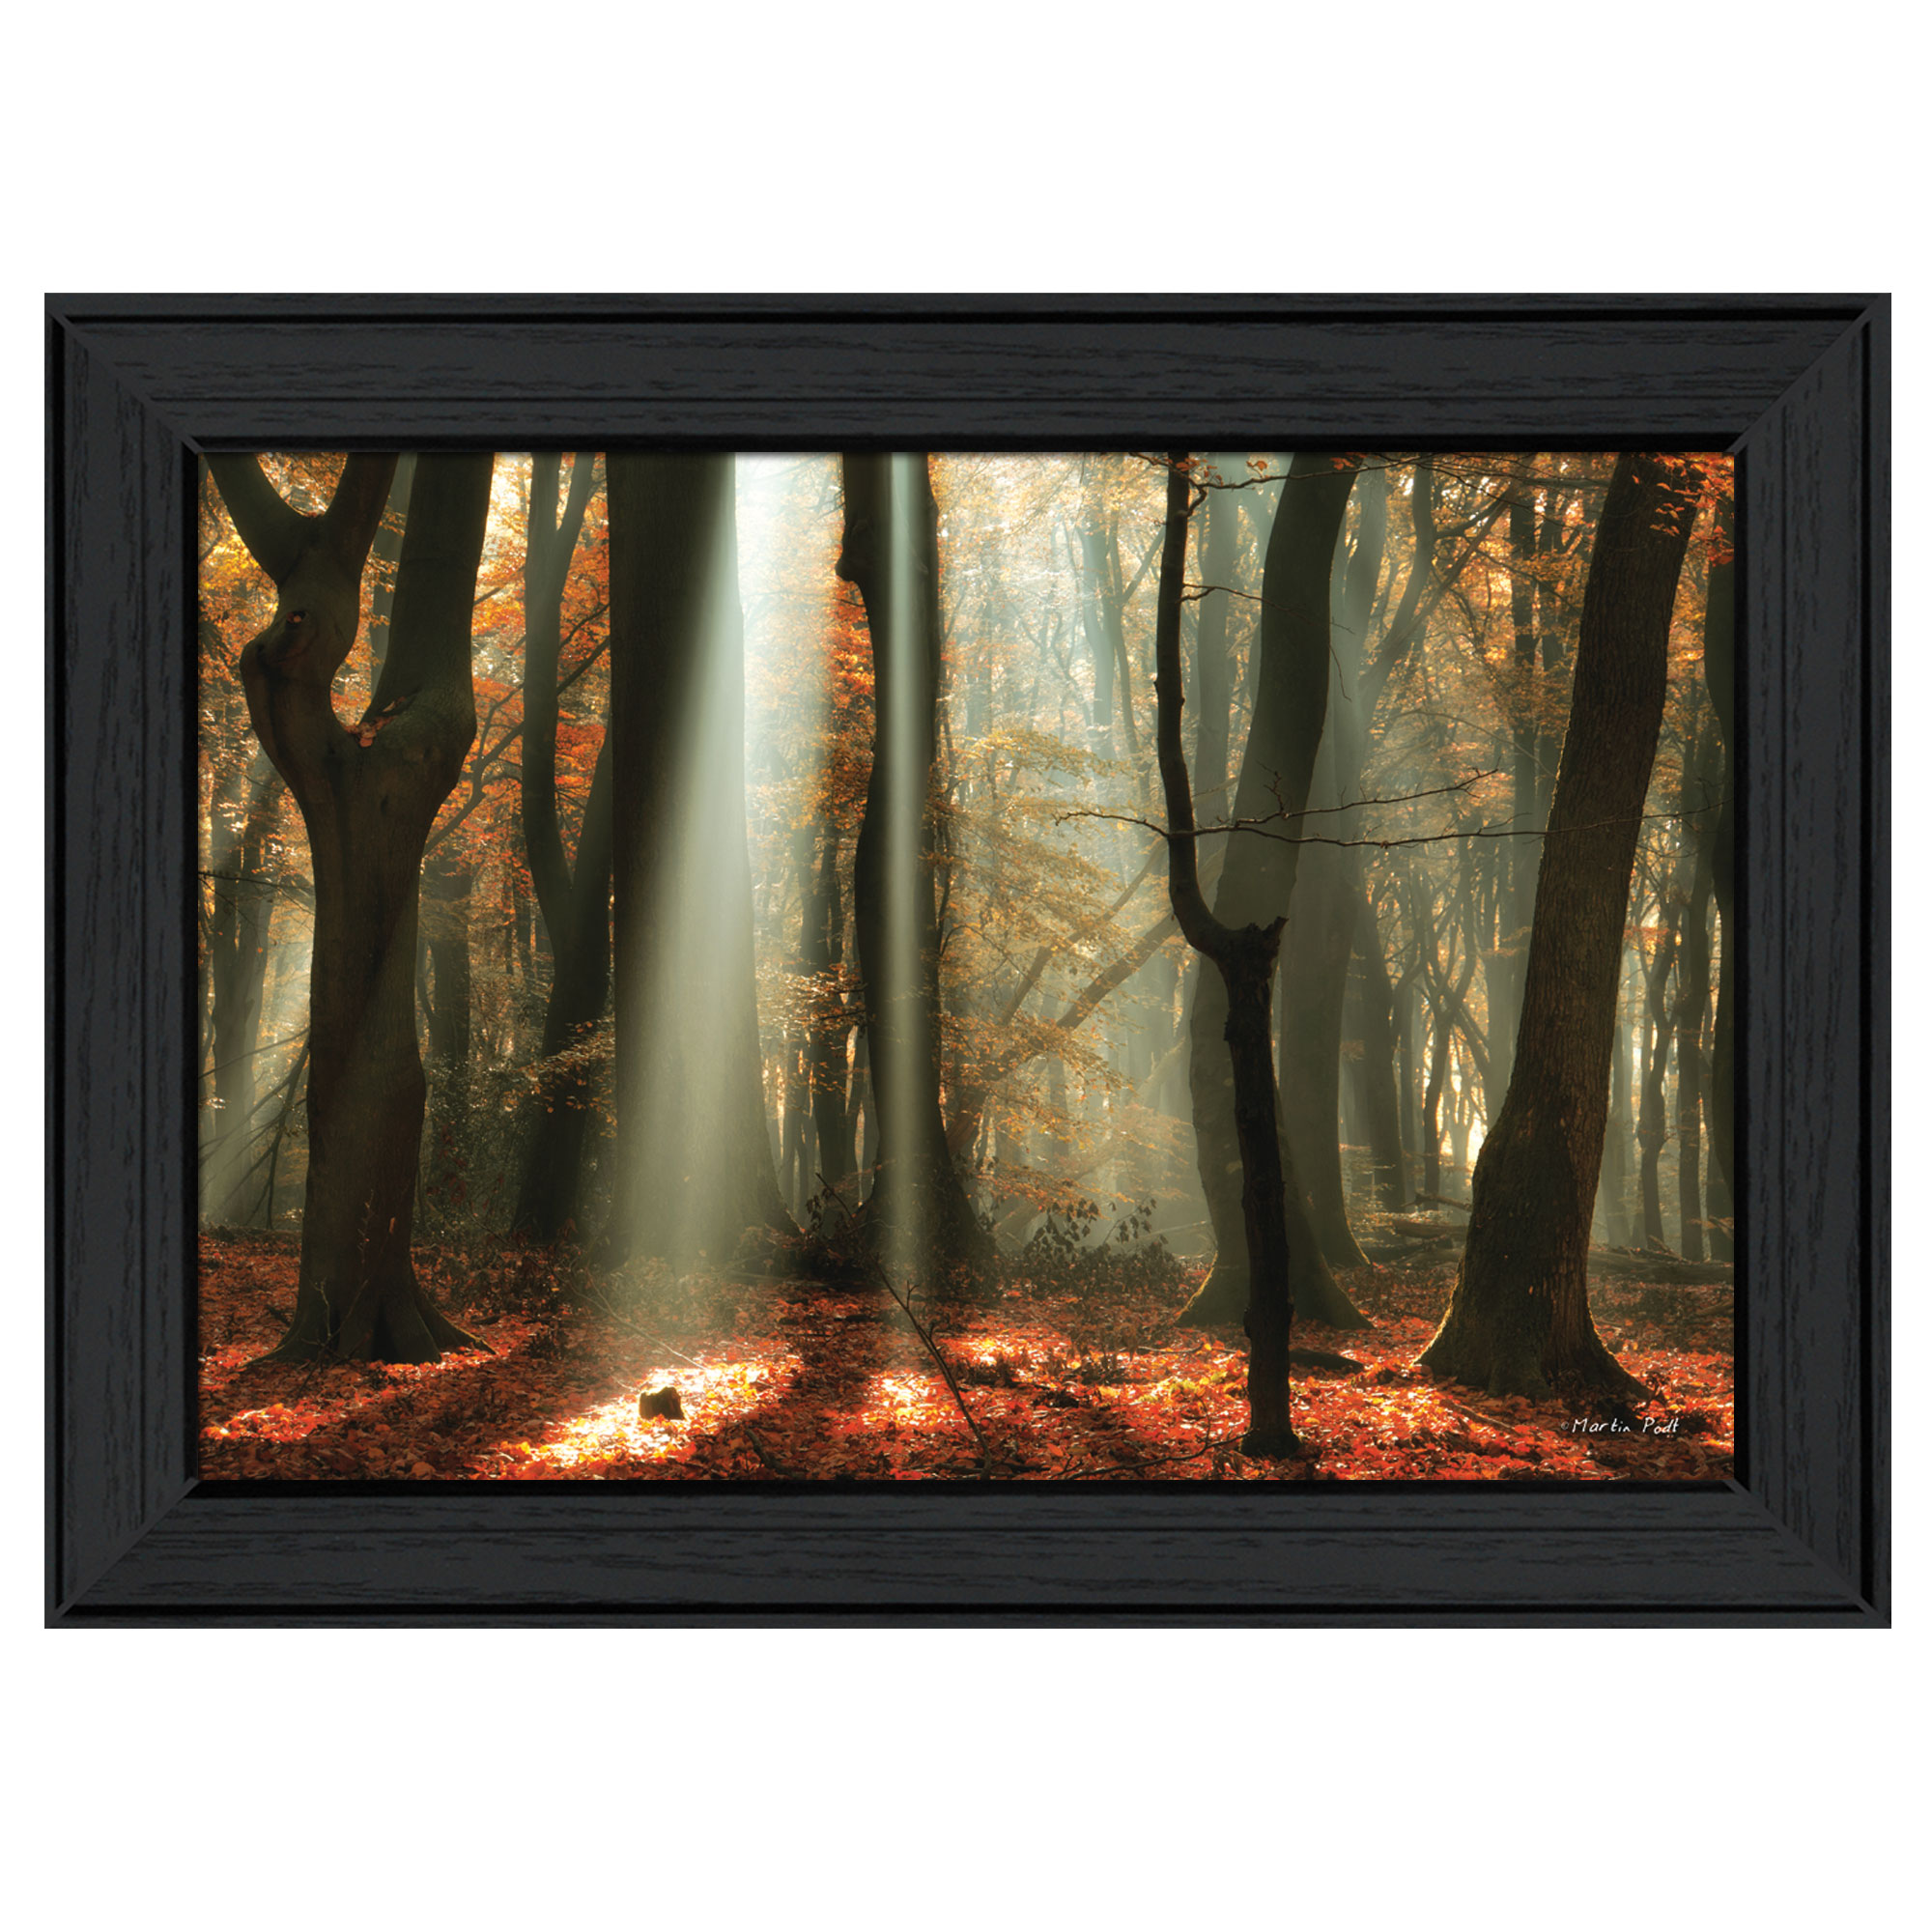 "Beam Me Up" By Martin Podt, Printed Wall Art, Ready To Hang Framed Poster, Black Frame